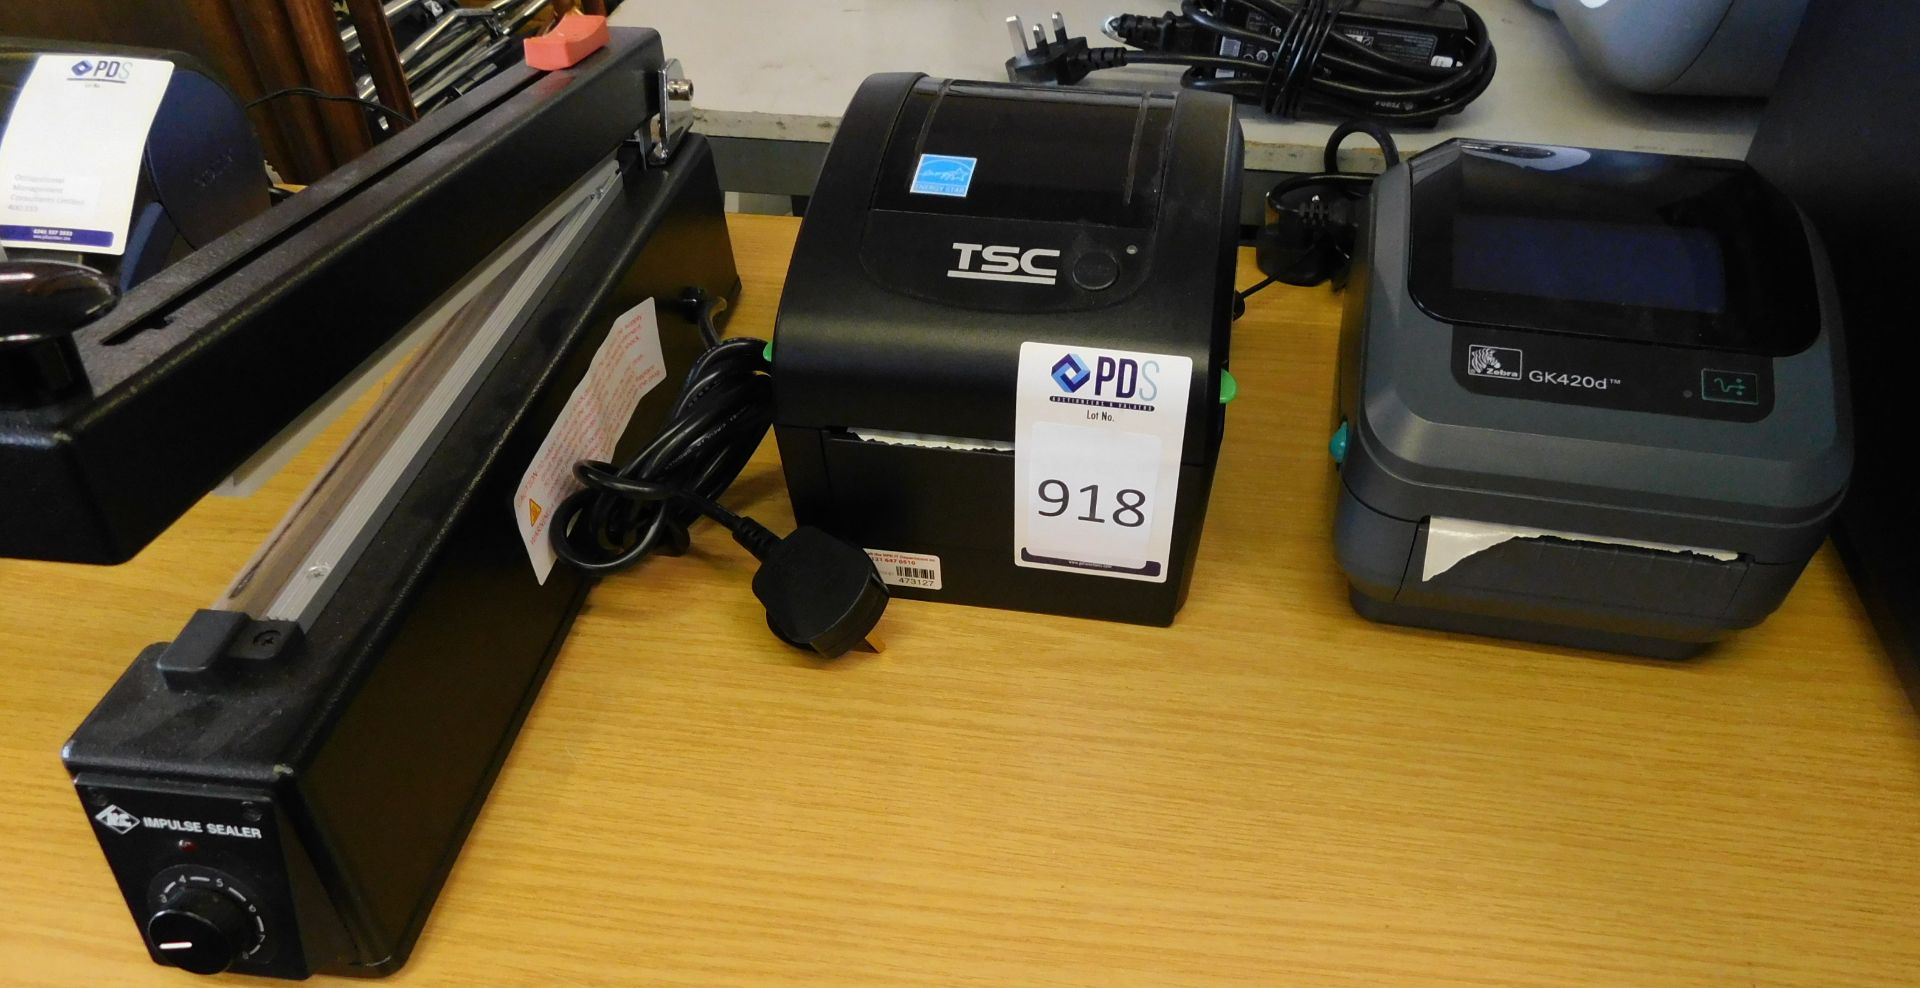 2 Label Printers & Heat Sealer (Location: Stockport. Please Refer to General Notes)